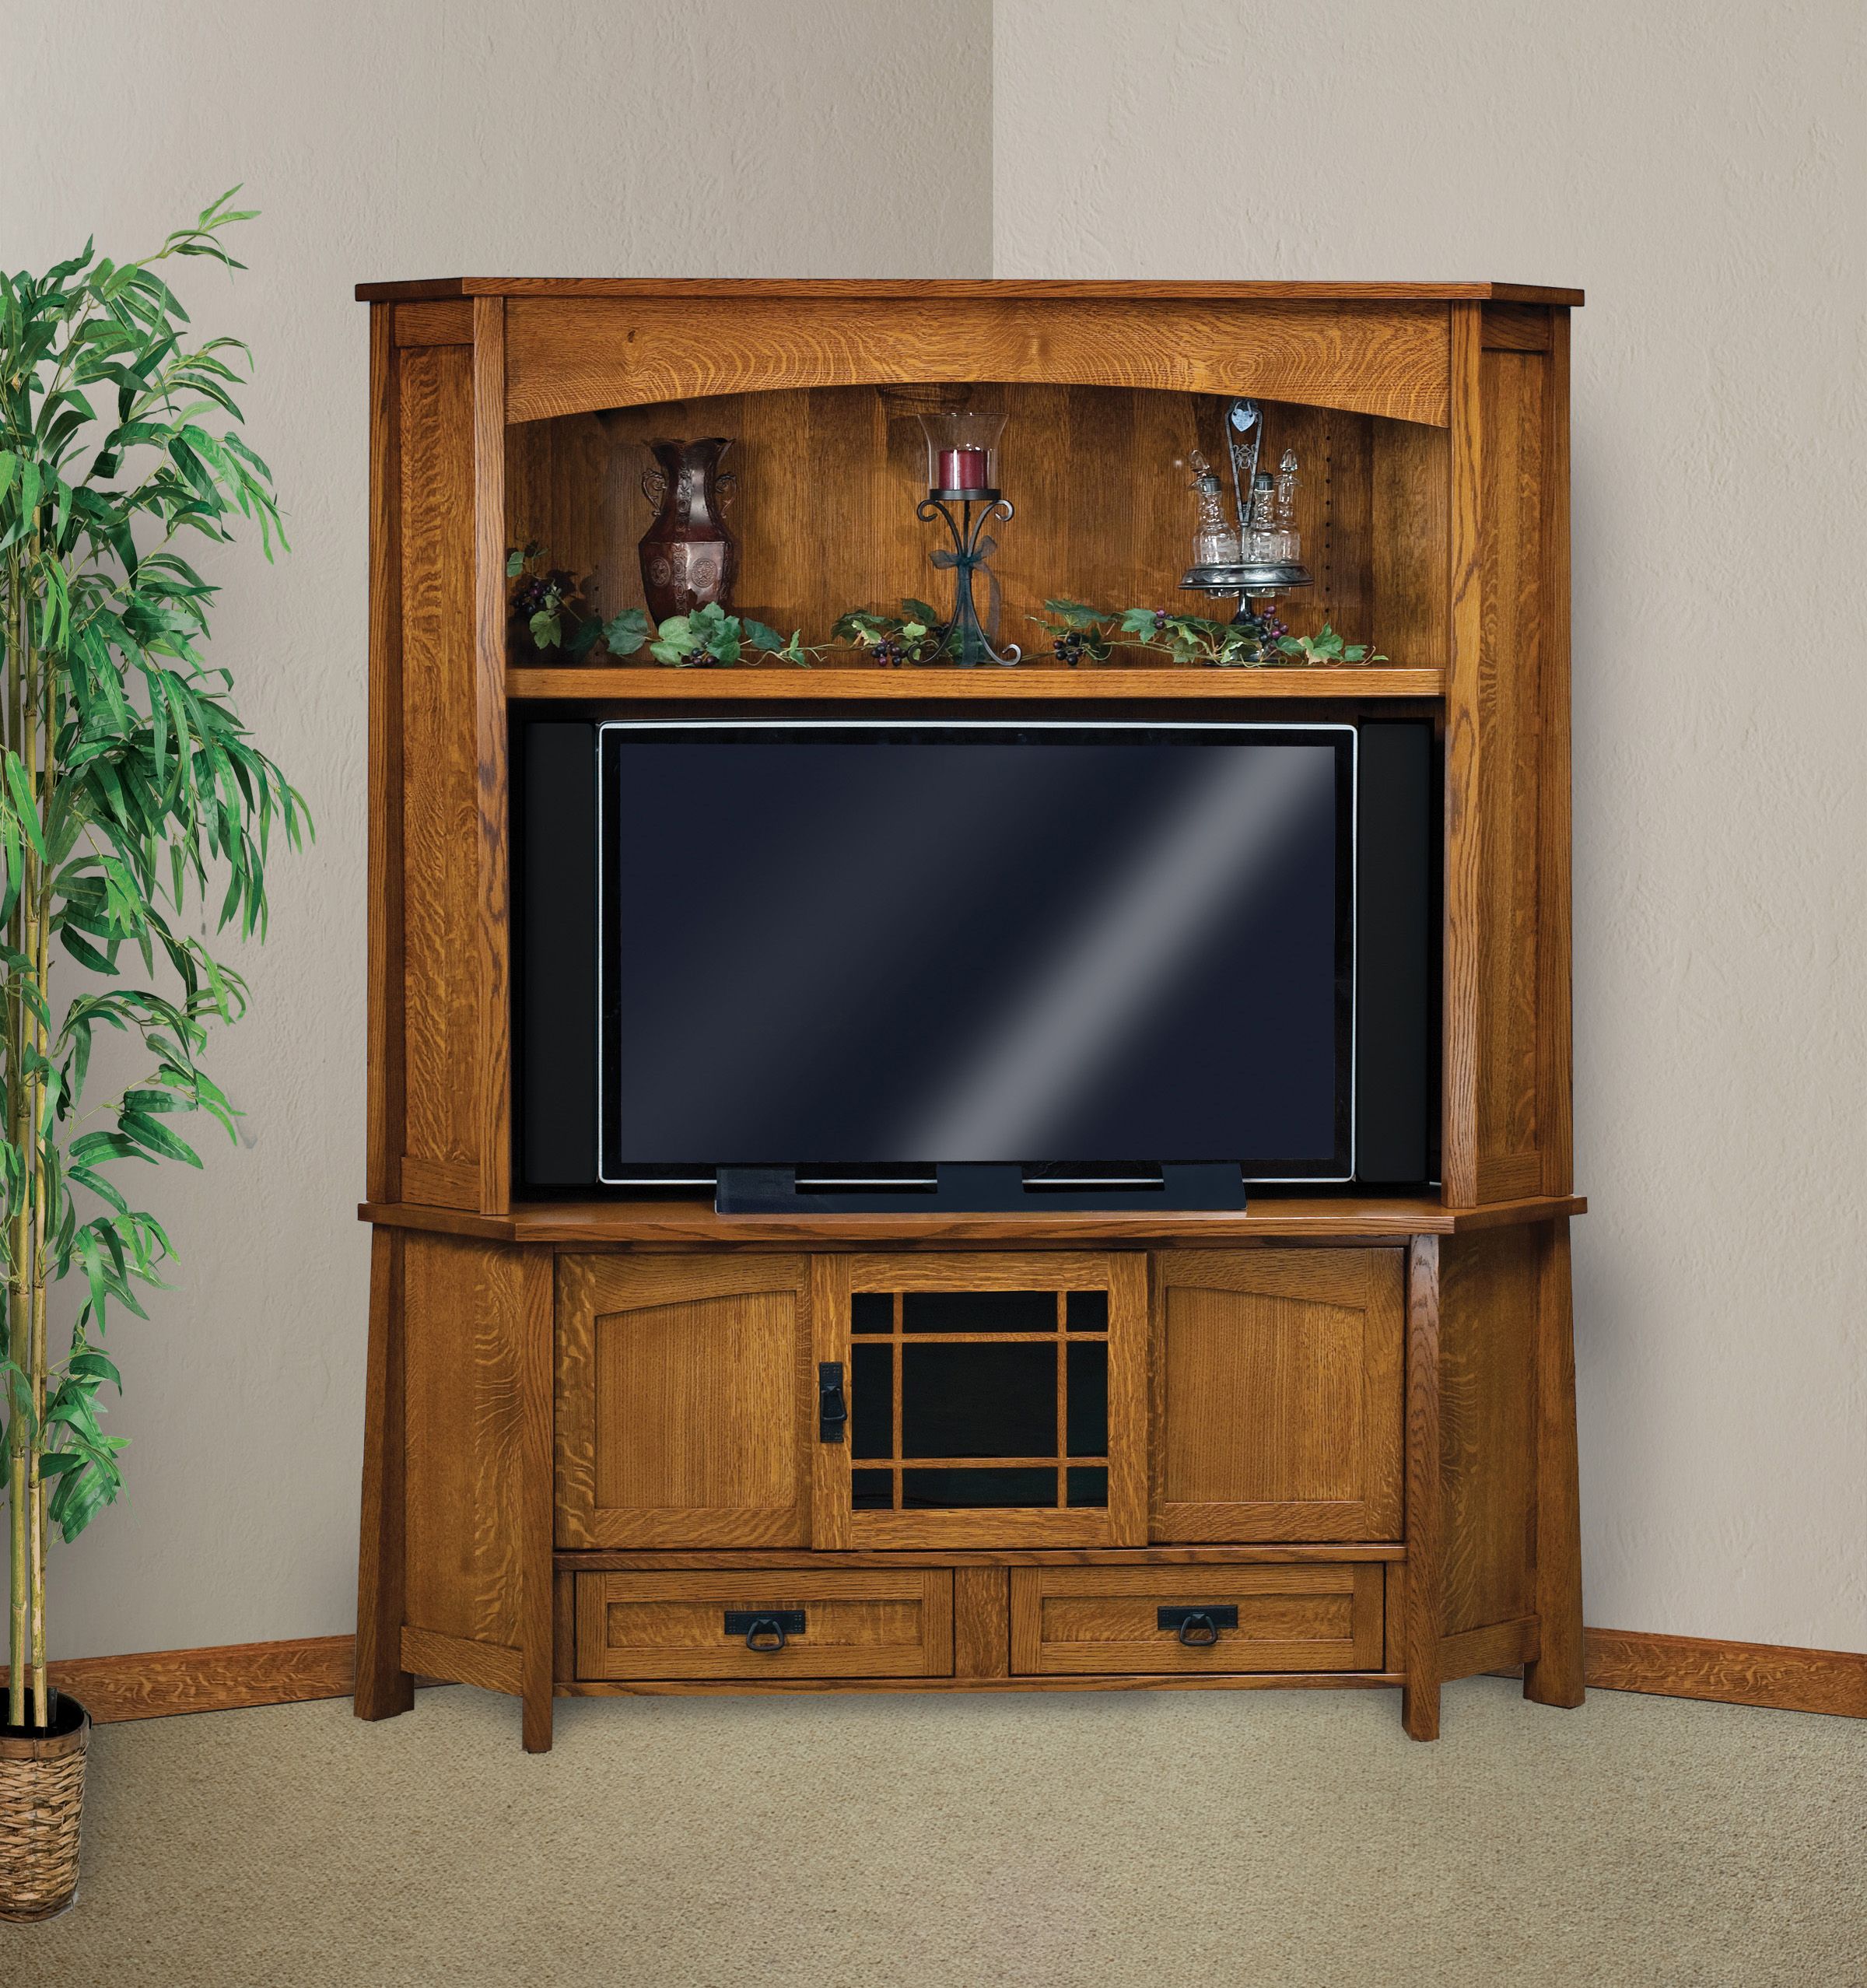 Modesto Corner Tv Hutch | Amish Solid Wood Tv Stands | Kvadro Furniture Inside 110" Tvs Wood Tv Cabinet With Drawers (Gallery 6 of 20)